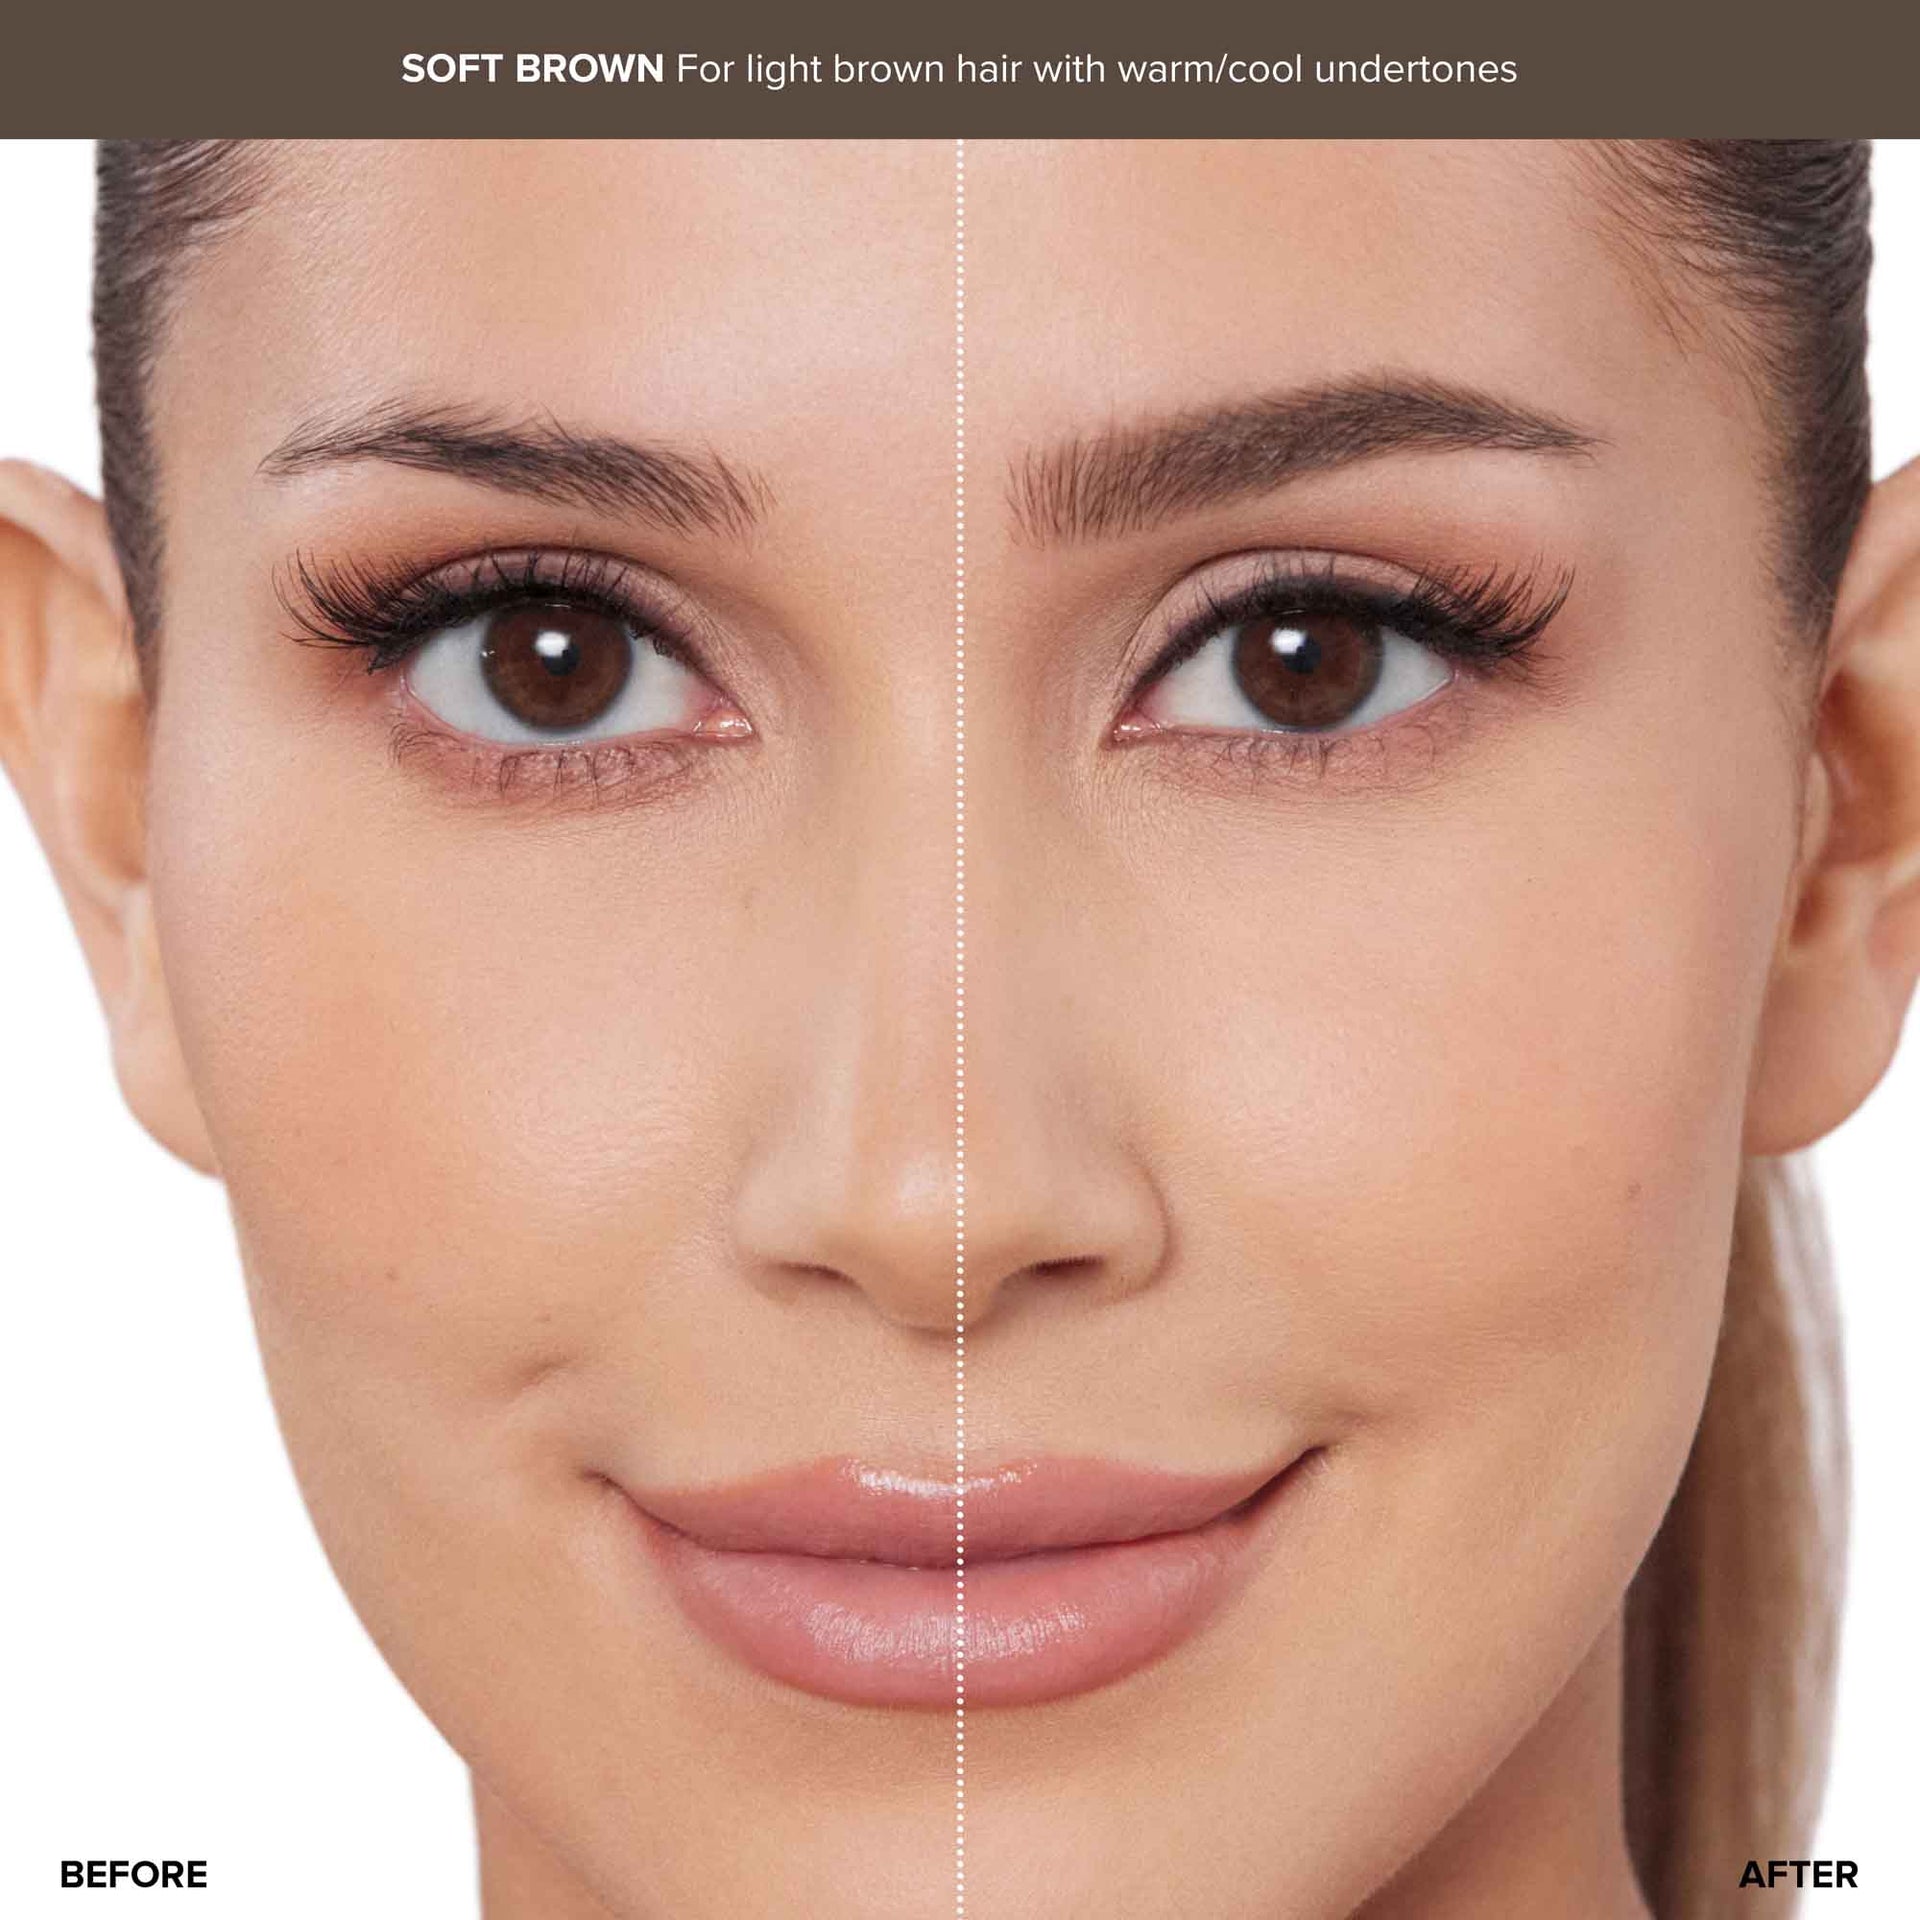 Soft Brown | Sculpted & Defined Brow Kit Before & After - Soft Brown